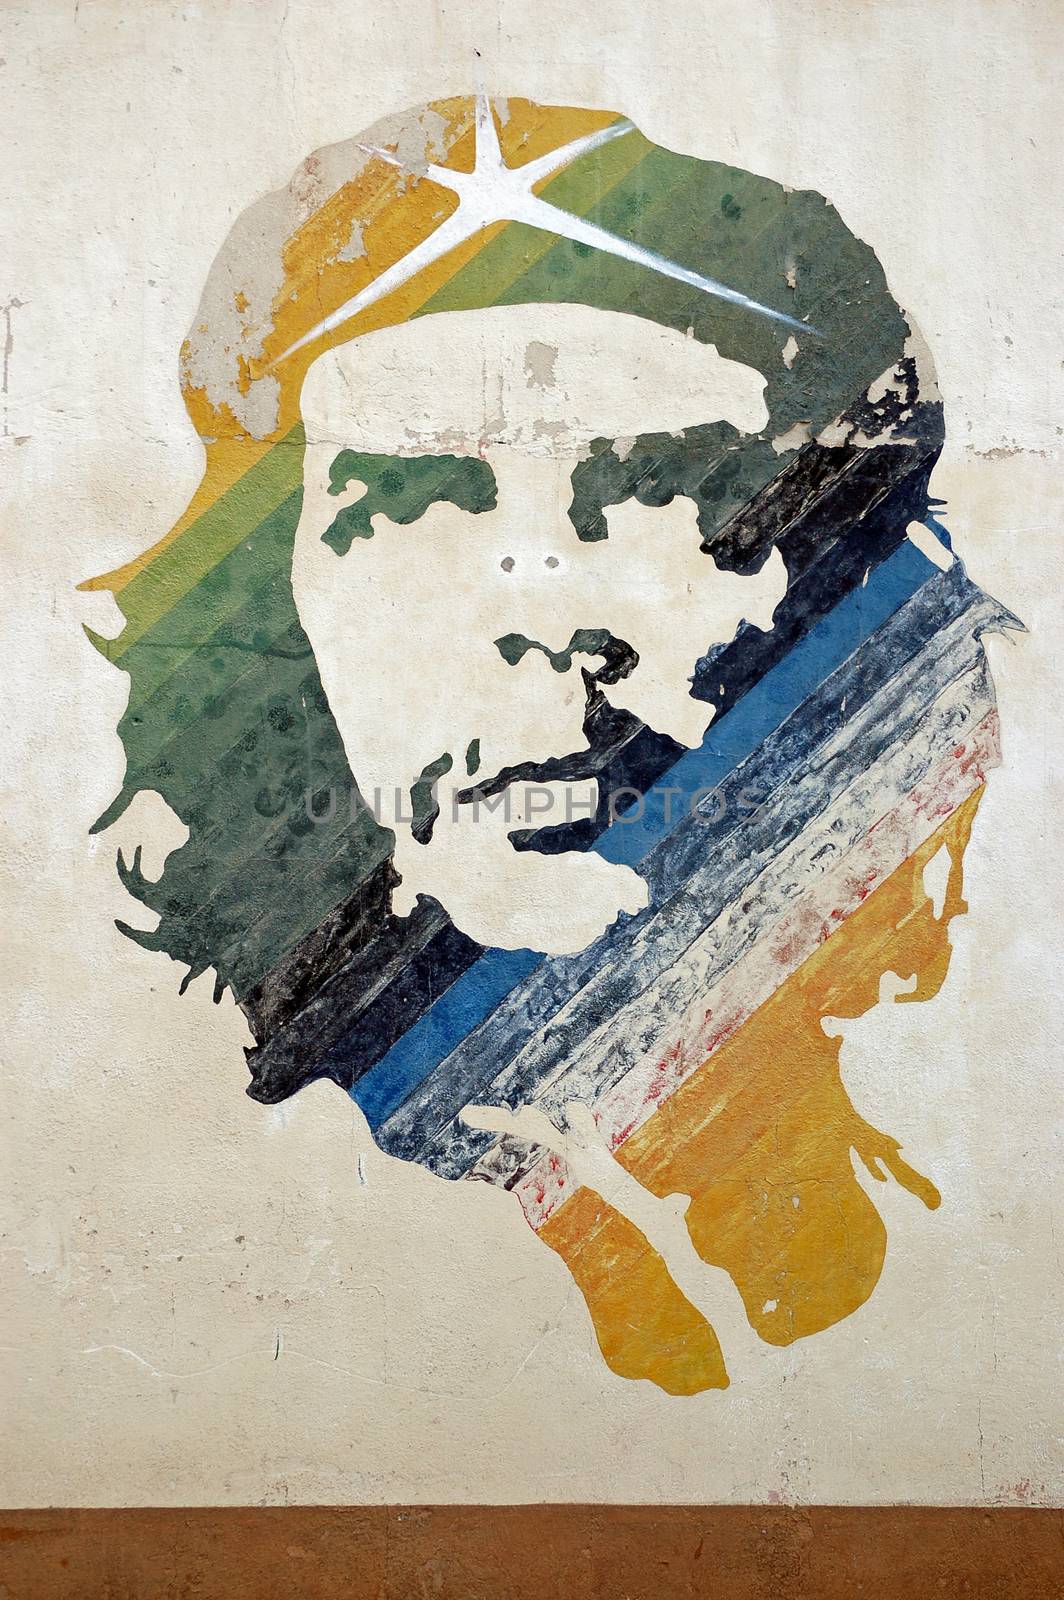 A wall painted with a colourful mural of the Cuban revolutionary leader Che Guevara. The image over looks a car park in Old Havana.